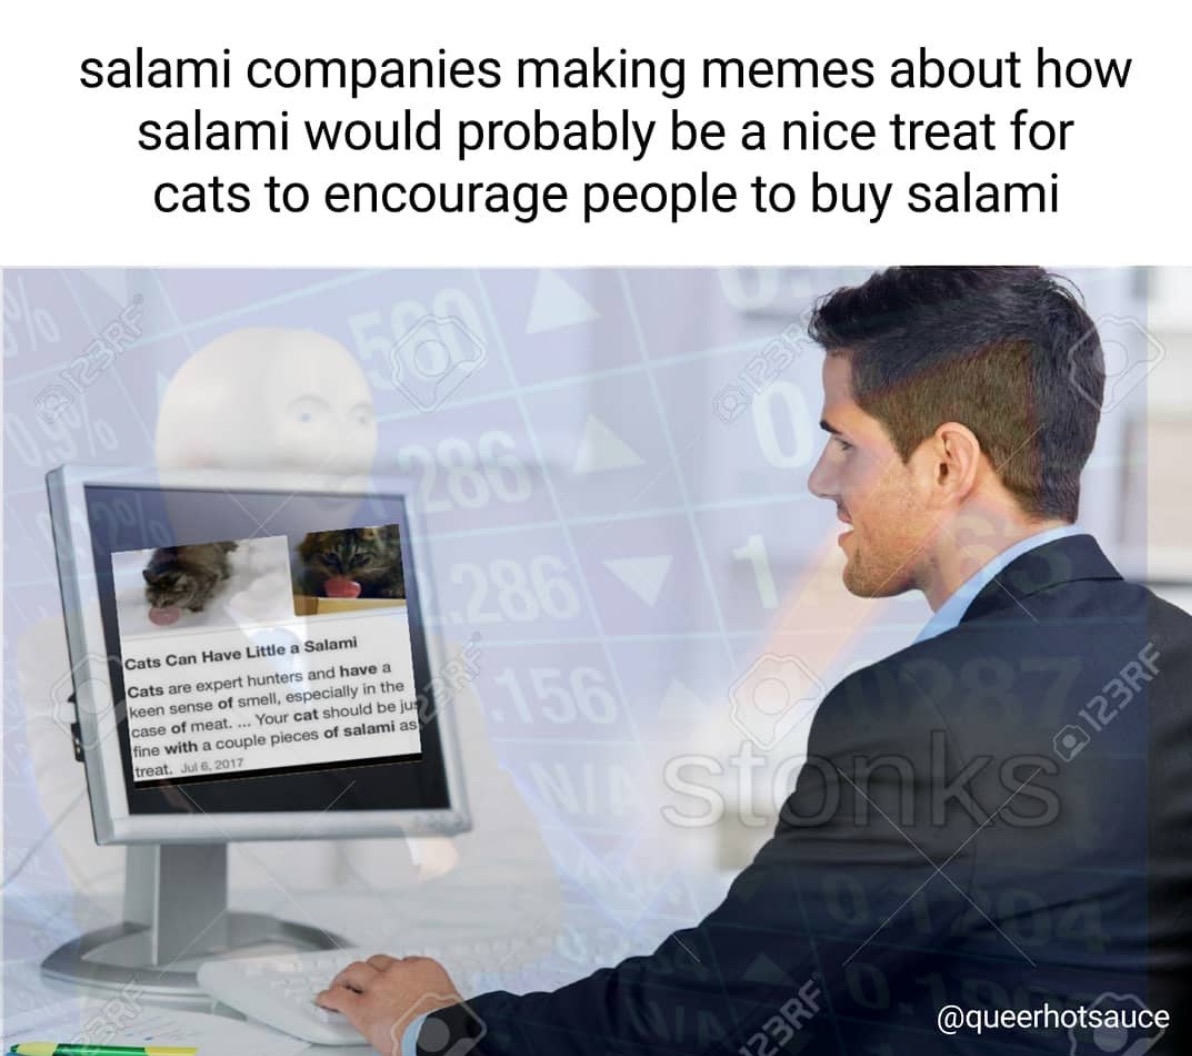 meme - salami companies making memes about how salami would probably be a nice treat for cats to encourage people to buy salami Cats Can Have Little a Salami Cats are expert hunters and have a keen sense of smell, especially in the case of meat. ... Your